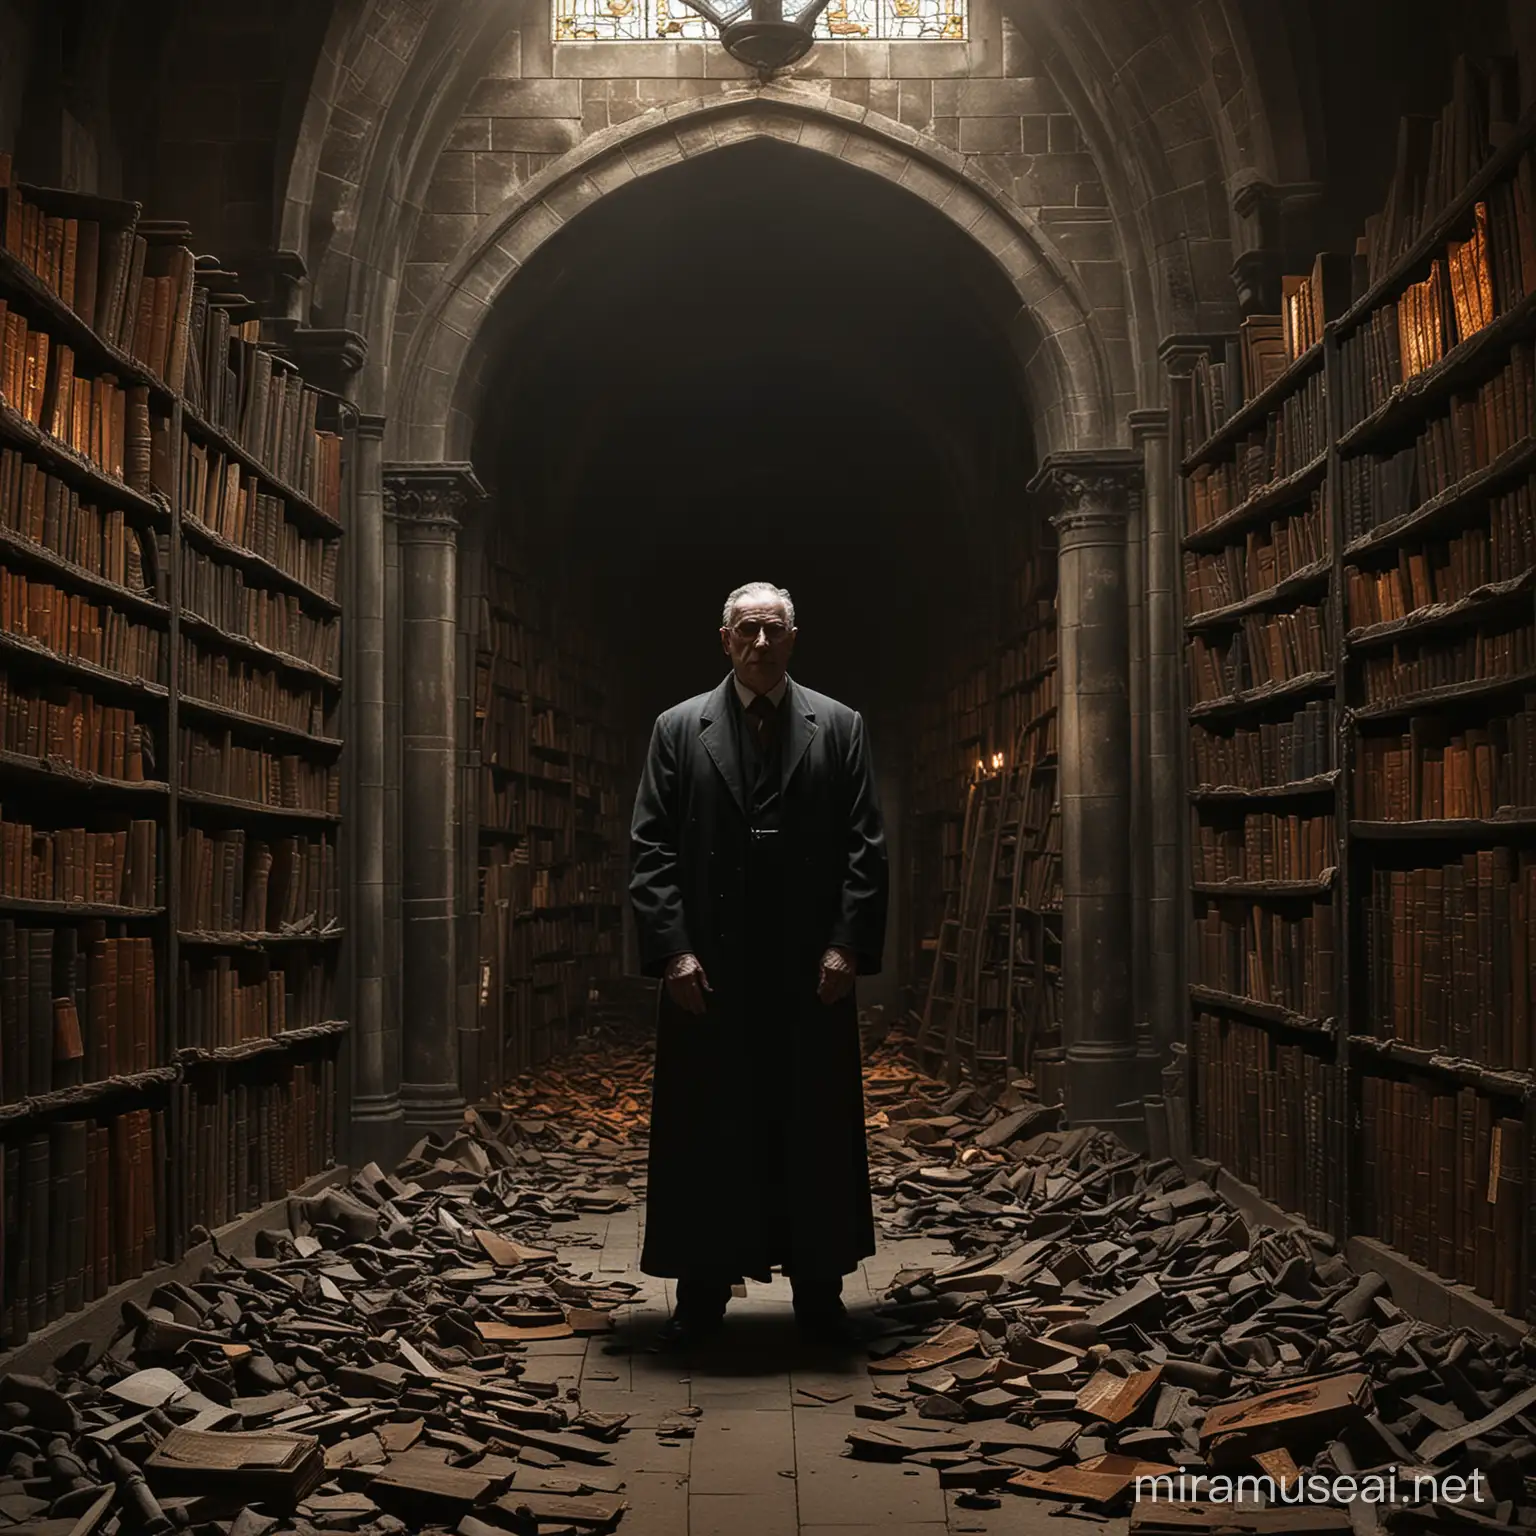 In the background, imagine a dimly lit church library with ancient, towering bookshelves filled with ominous-looking tomes. The shelves cast long shadows that dance across the walls, creating a sense of mystery and foreboding. Traditional stained glass windows, depicting scenes of biblical wrath and judgment, loom overhead, their colors muted in the dim light.

The man, seated amidst this intimidating backdrop, exudes a frightening aura. His stern expression is now tinged with a hint of menace, his hazel eyes piercing through the darkness like burning coals. The large nose and big ears, previously described, now take on a more sinister aspect, adding to his intimidating presence.

His broad shoulders and stocky build seem to fill the space, making him appear larger than life and even more imposing. The suit he wears, once casual, now seems to be draped on a figure of power and dominance. The shadows play across his face, accentuating the depth of his brooding gaze and the intensity of his stare.

Together, the intimidating background and the scary presence of the man create a chilling and memorable visual experience, drawing the viewer into a world of darkness and apprehension.